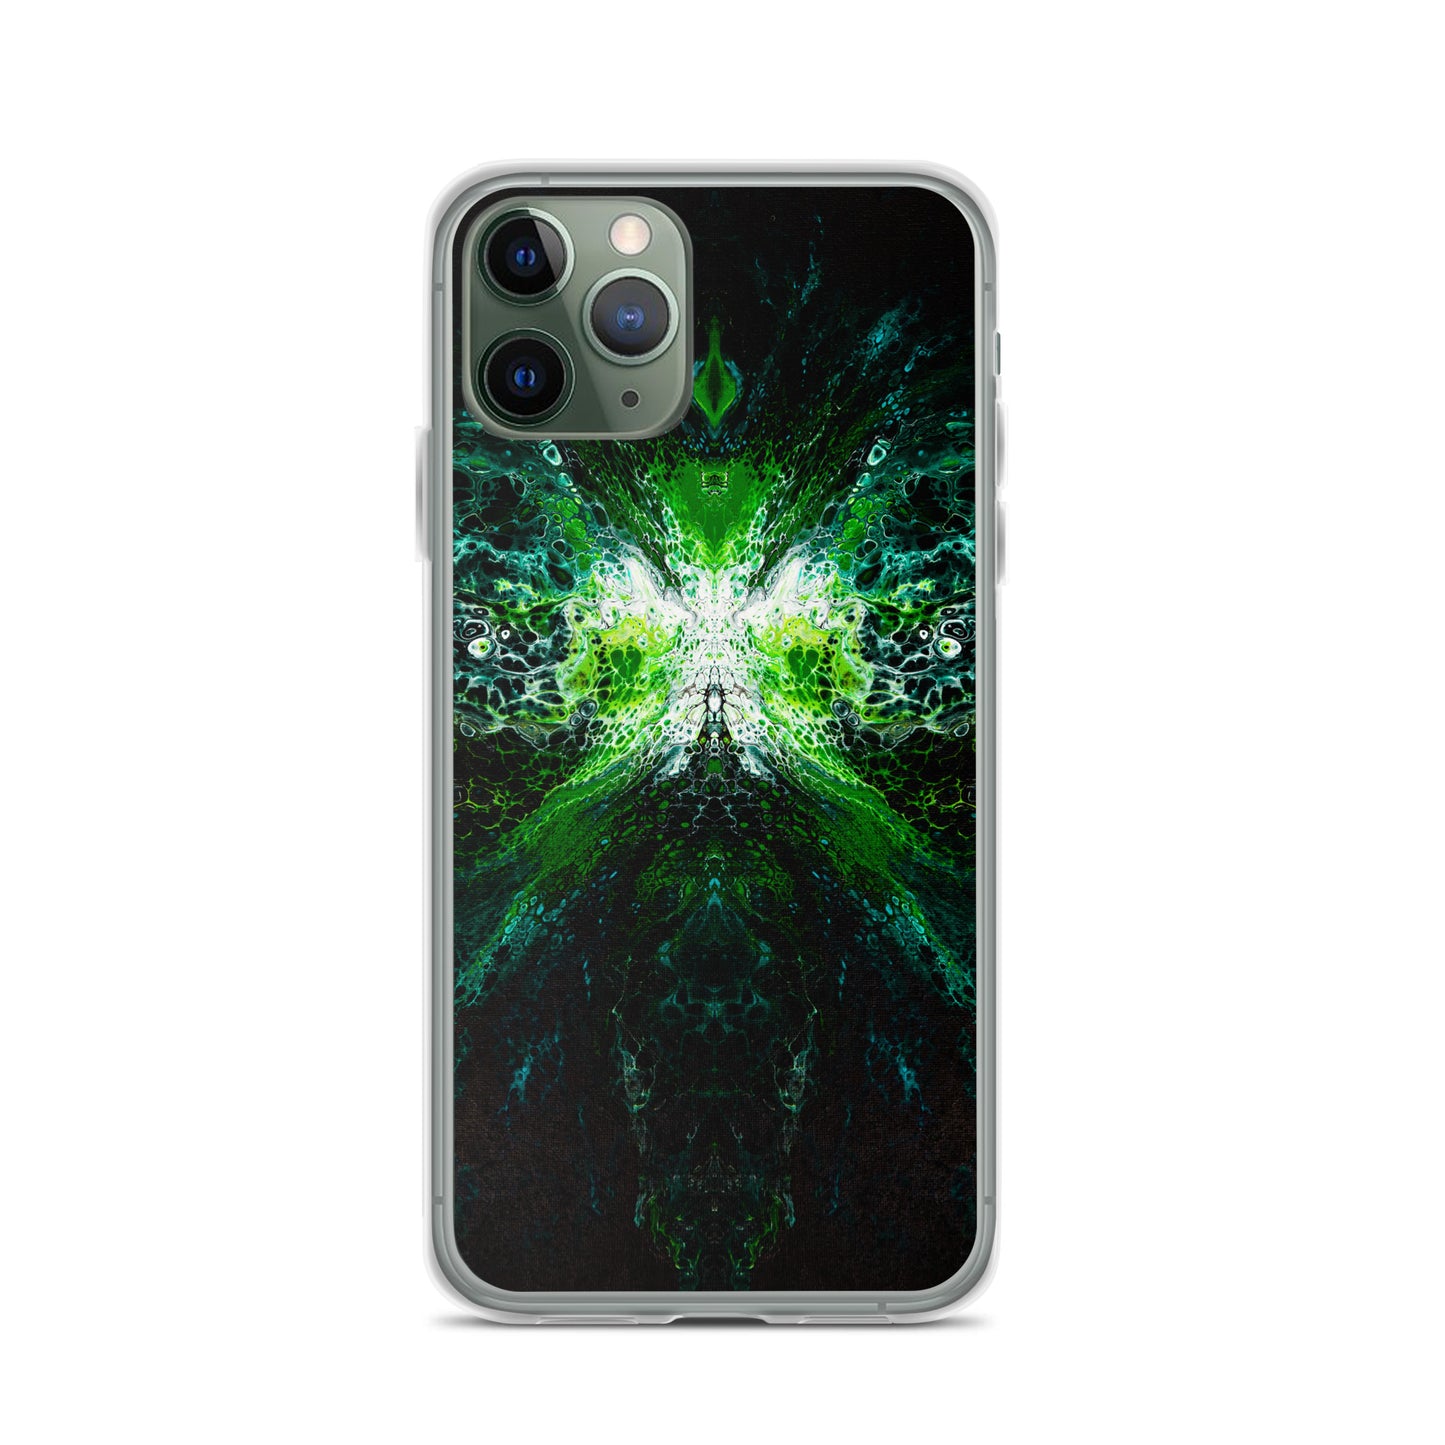 NightOwl Studio Custom Phone Case Compatible with iPhone, Ultra Slim Cover with Heavy Duty Scratch Resistant Shockproof Protection, Green Lantern